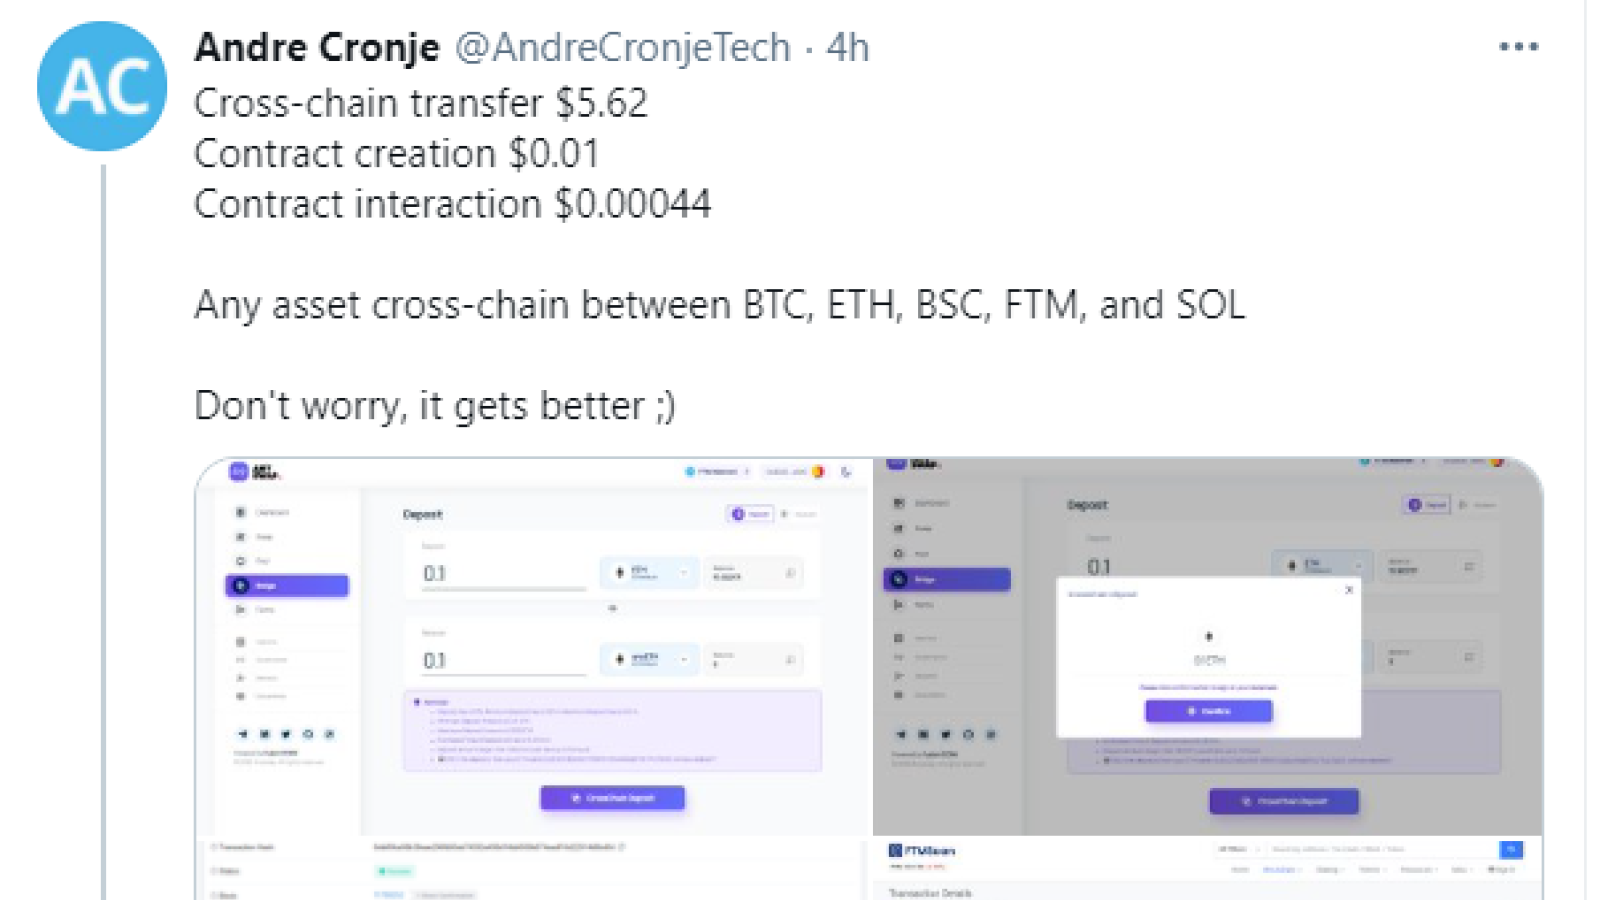 Tron's Justin Sun invites Andre Cronje to migrate from Ethereum to Tron